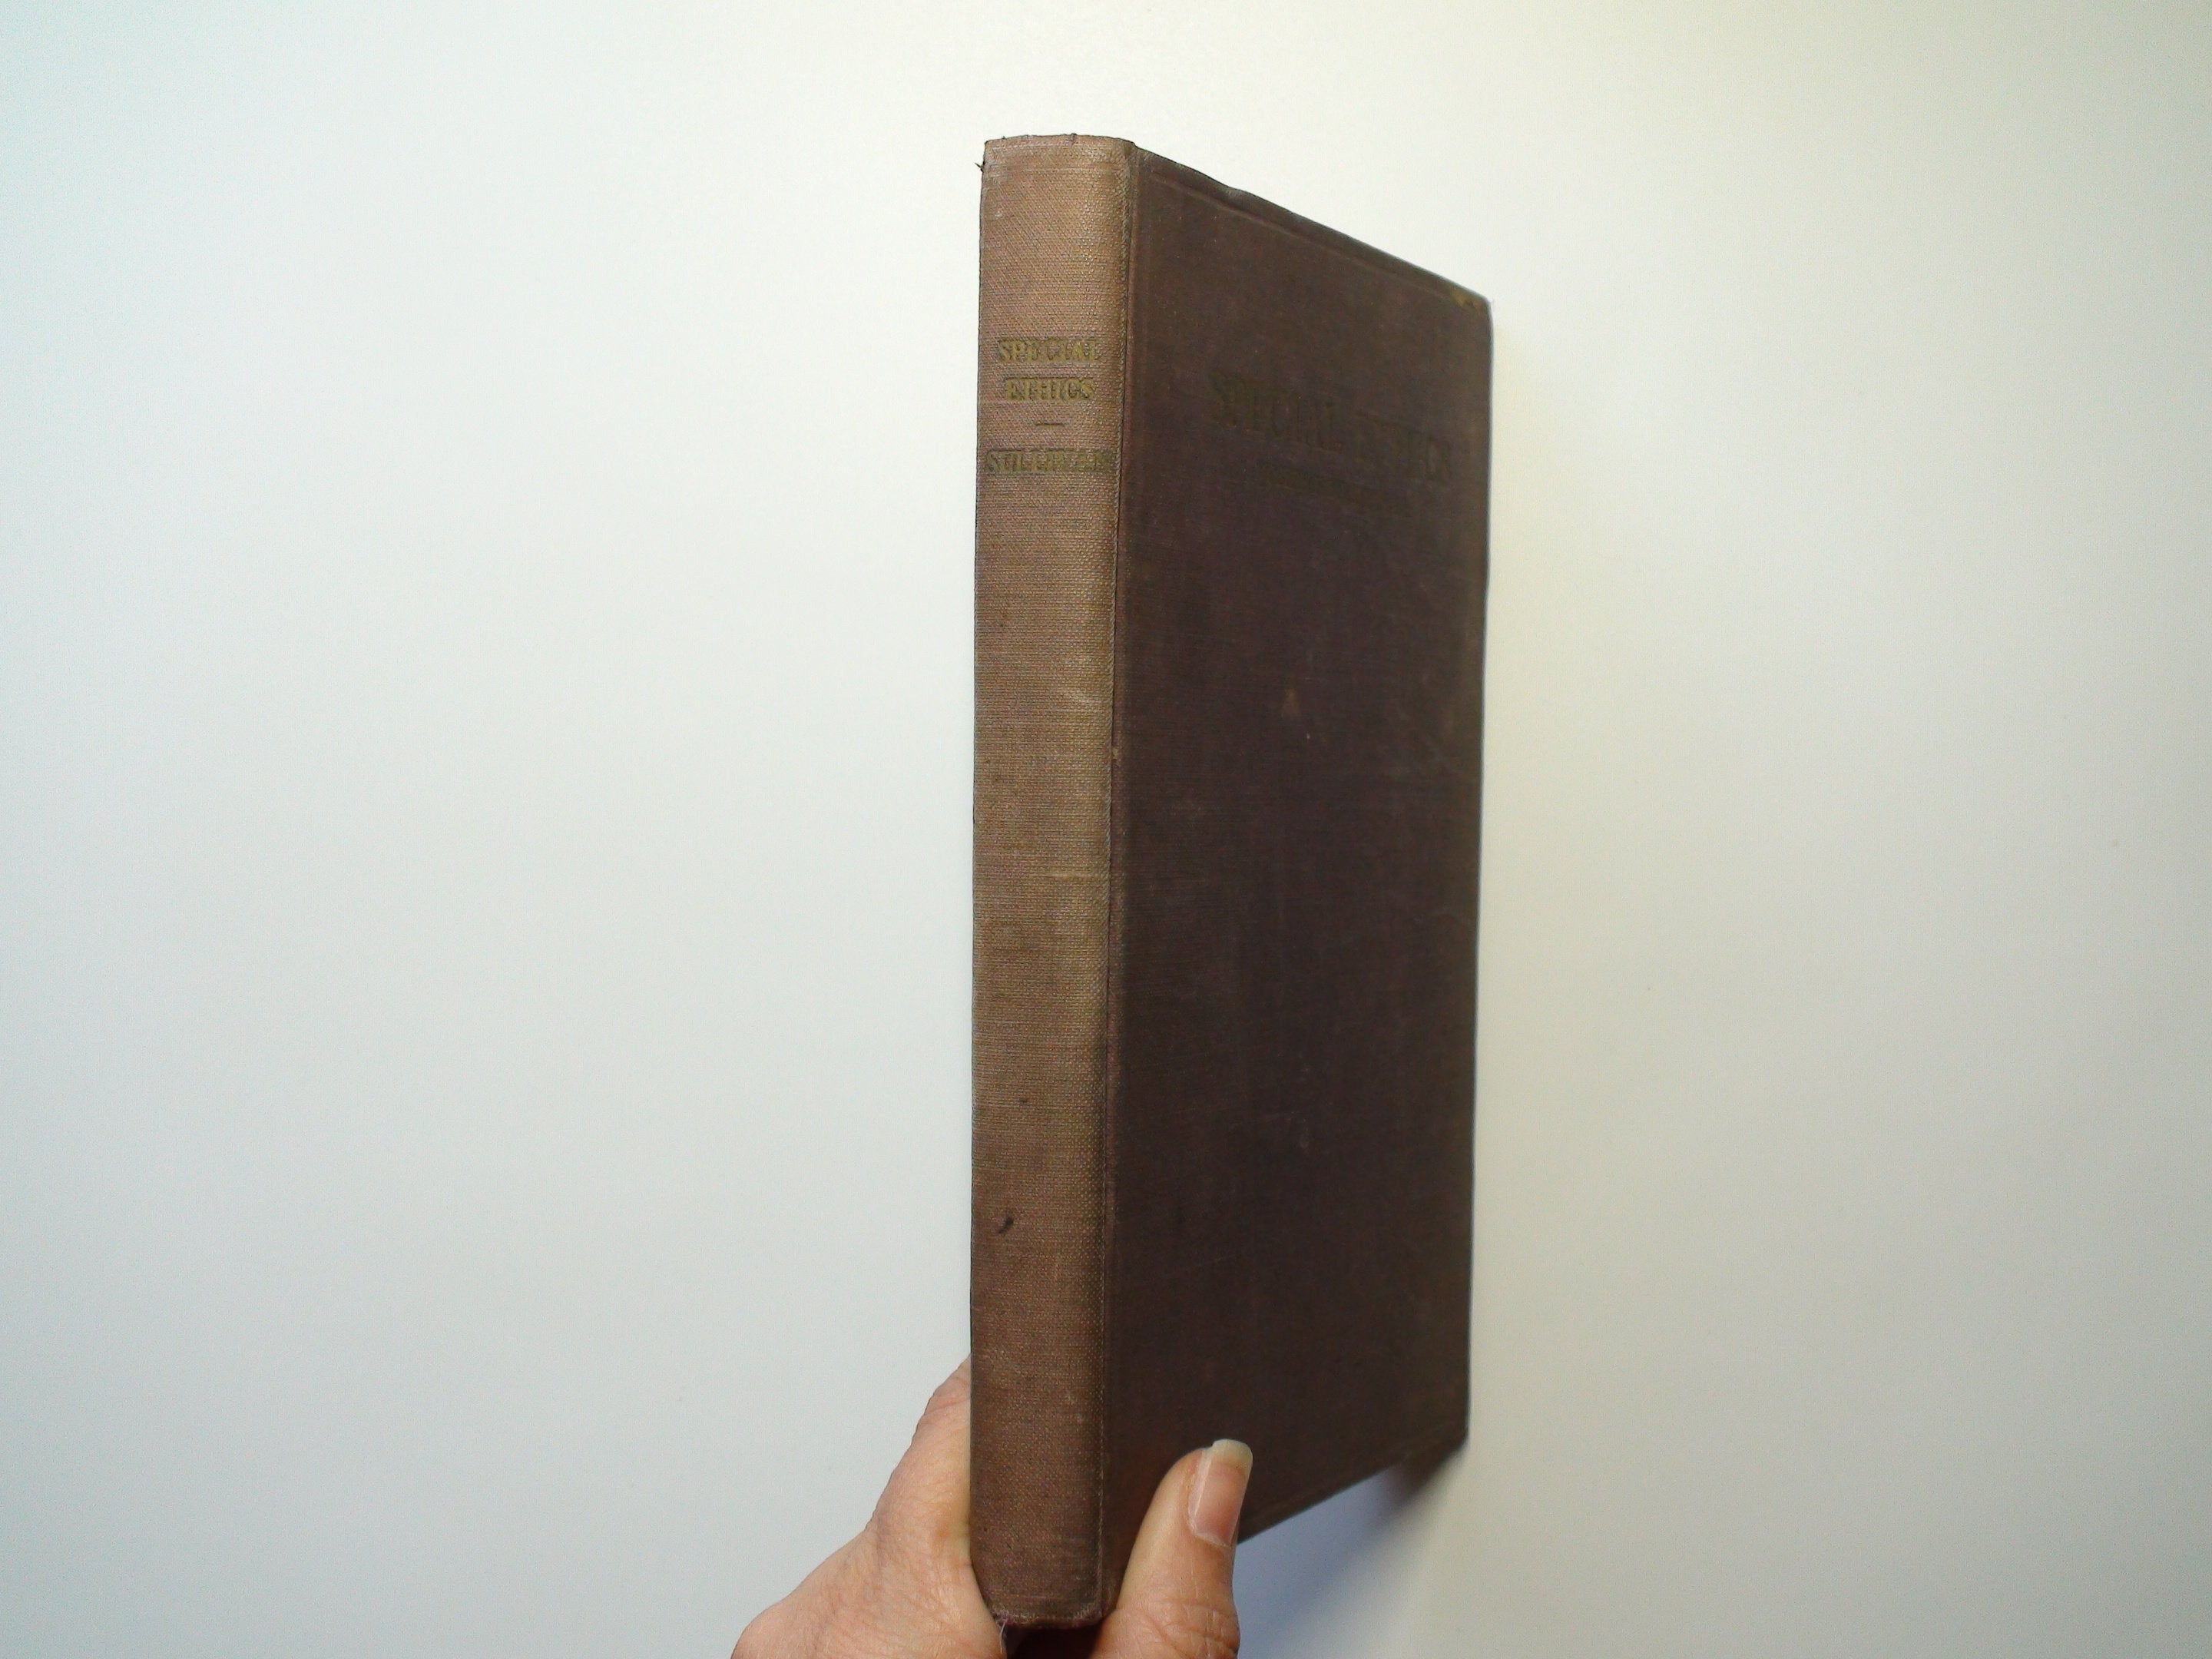 Special Ethics, a Digest of Ethics By Rev. Joseph F. Sullivan, 3rd Ed, 1931